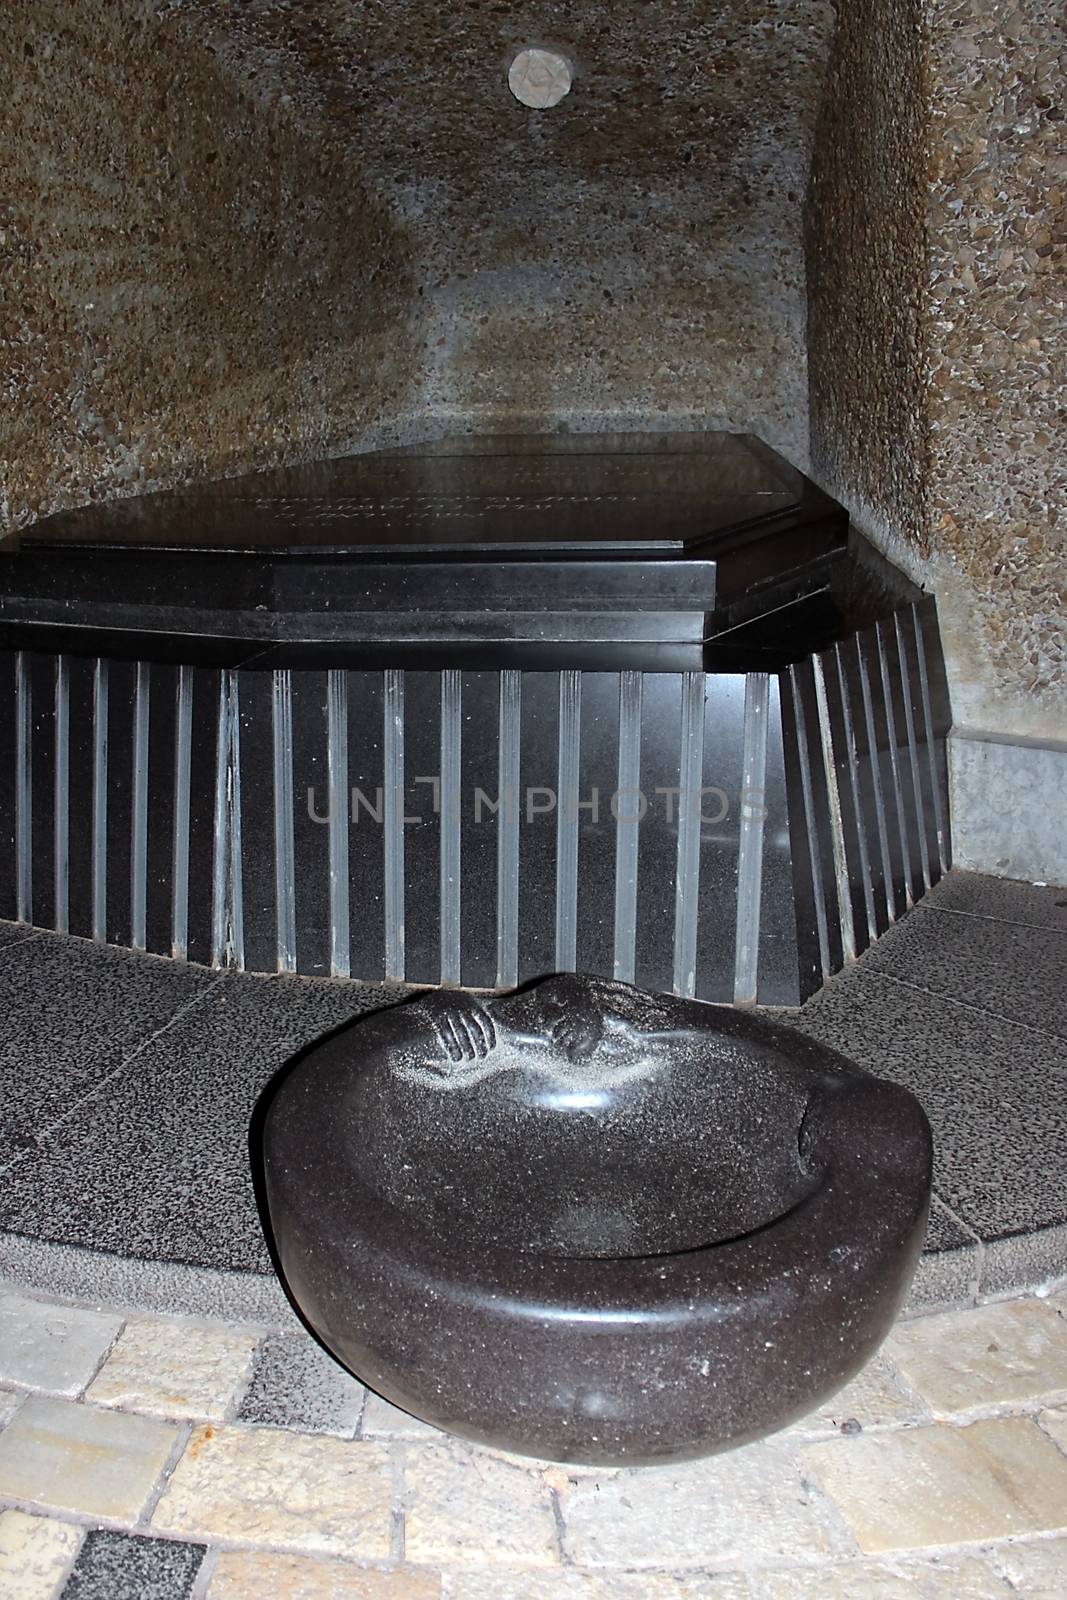 Ramat HaNadiv, Zichron Ya'akov, Israel - September 22: black granite tombstone in the family vault of Baron Rothschild, here are buried the Baron Edmond James de Rothschild and his wife Adelaide, September 22, 2014 in Zichron Ya'akov, Israel